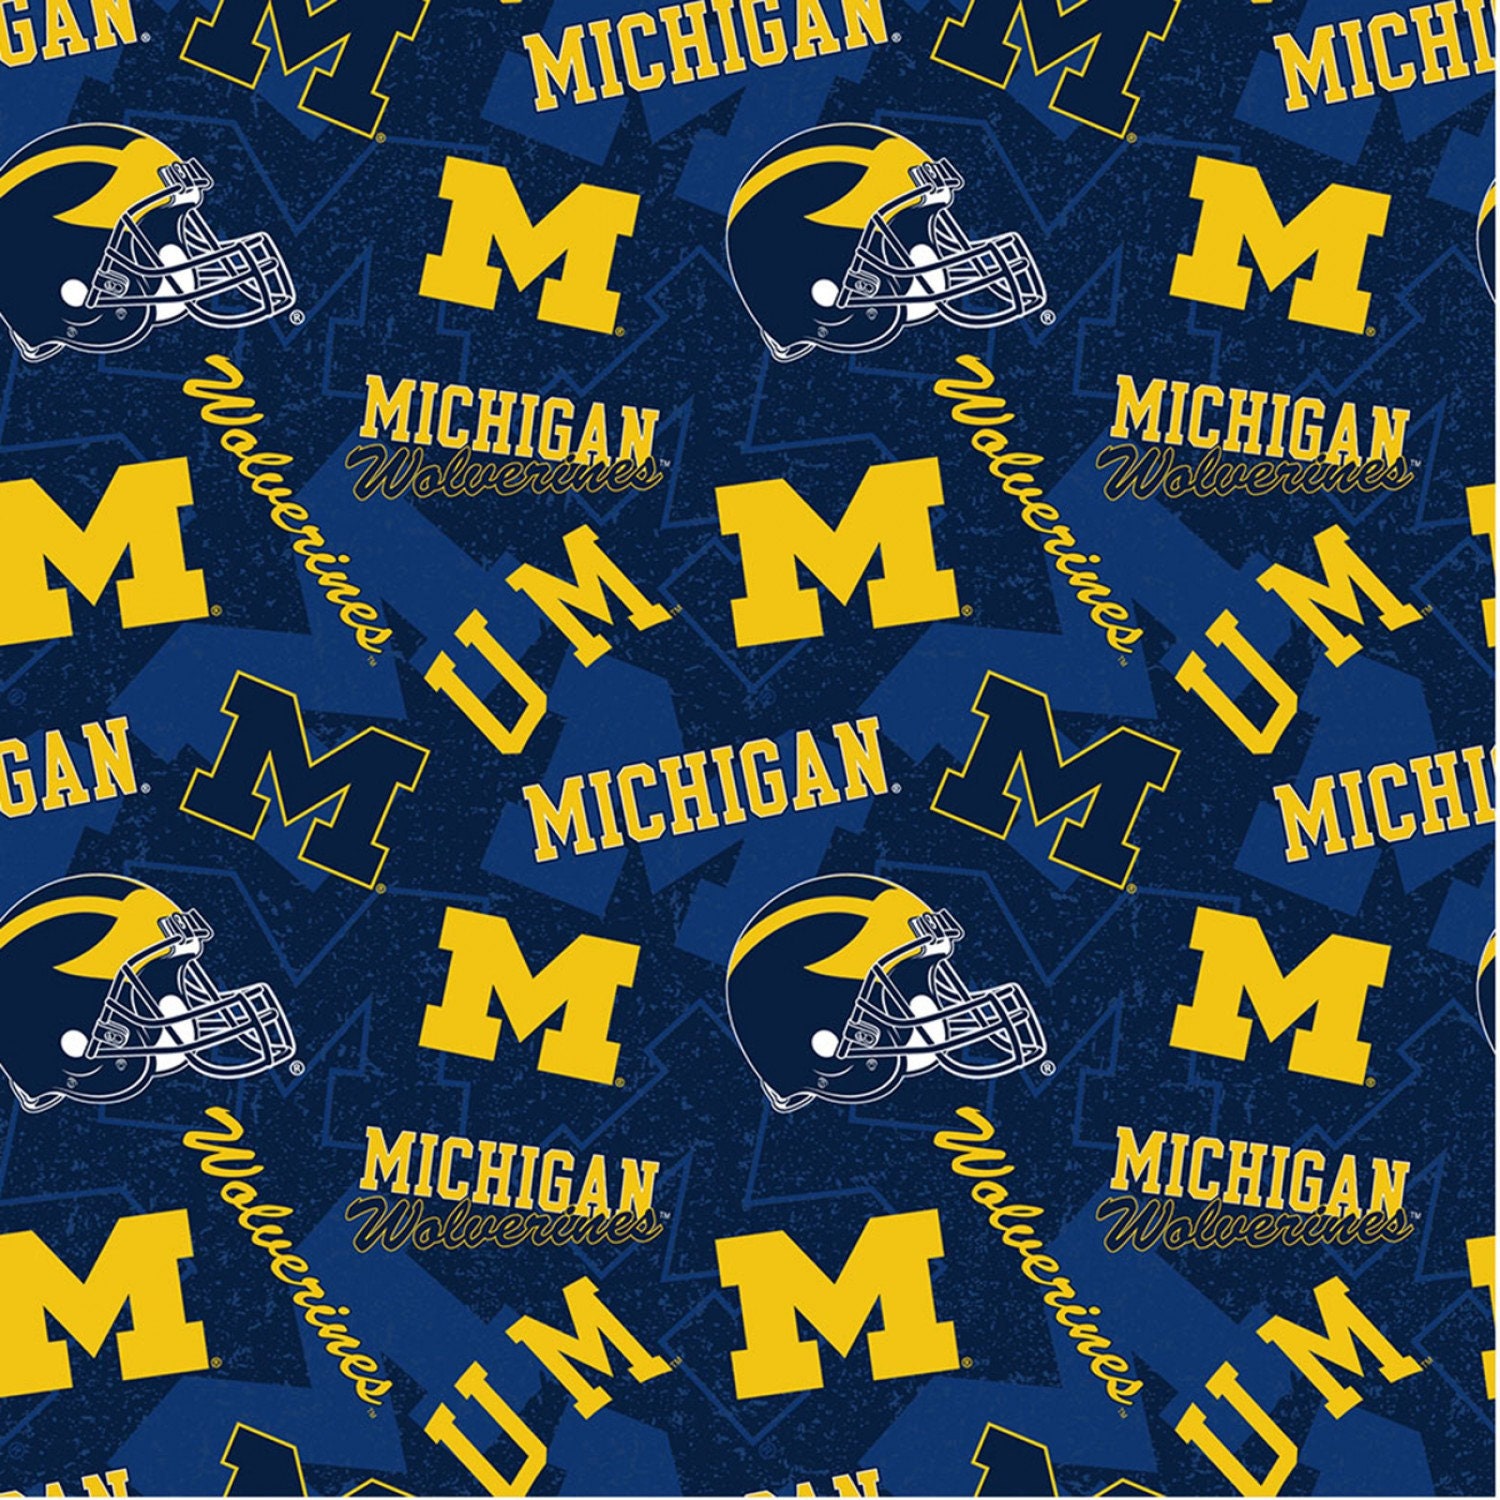 Flannel University of Michigan Wolverines U of M Go Blue Flannel Fabric  Print by the Yard (mchg1152) D286.27